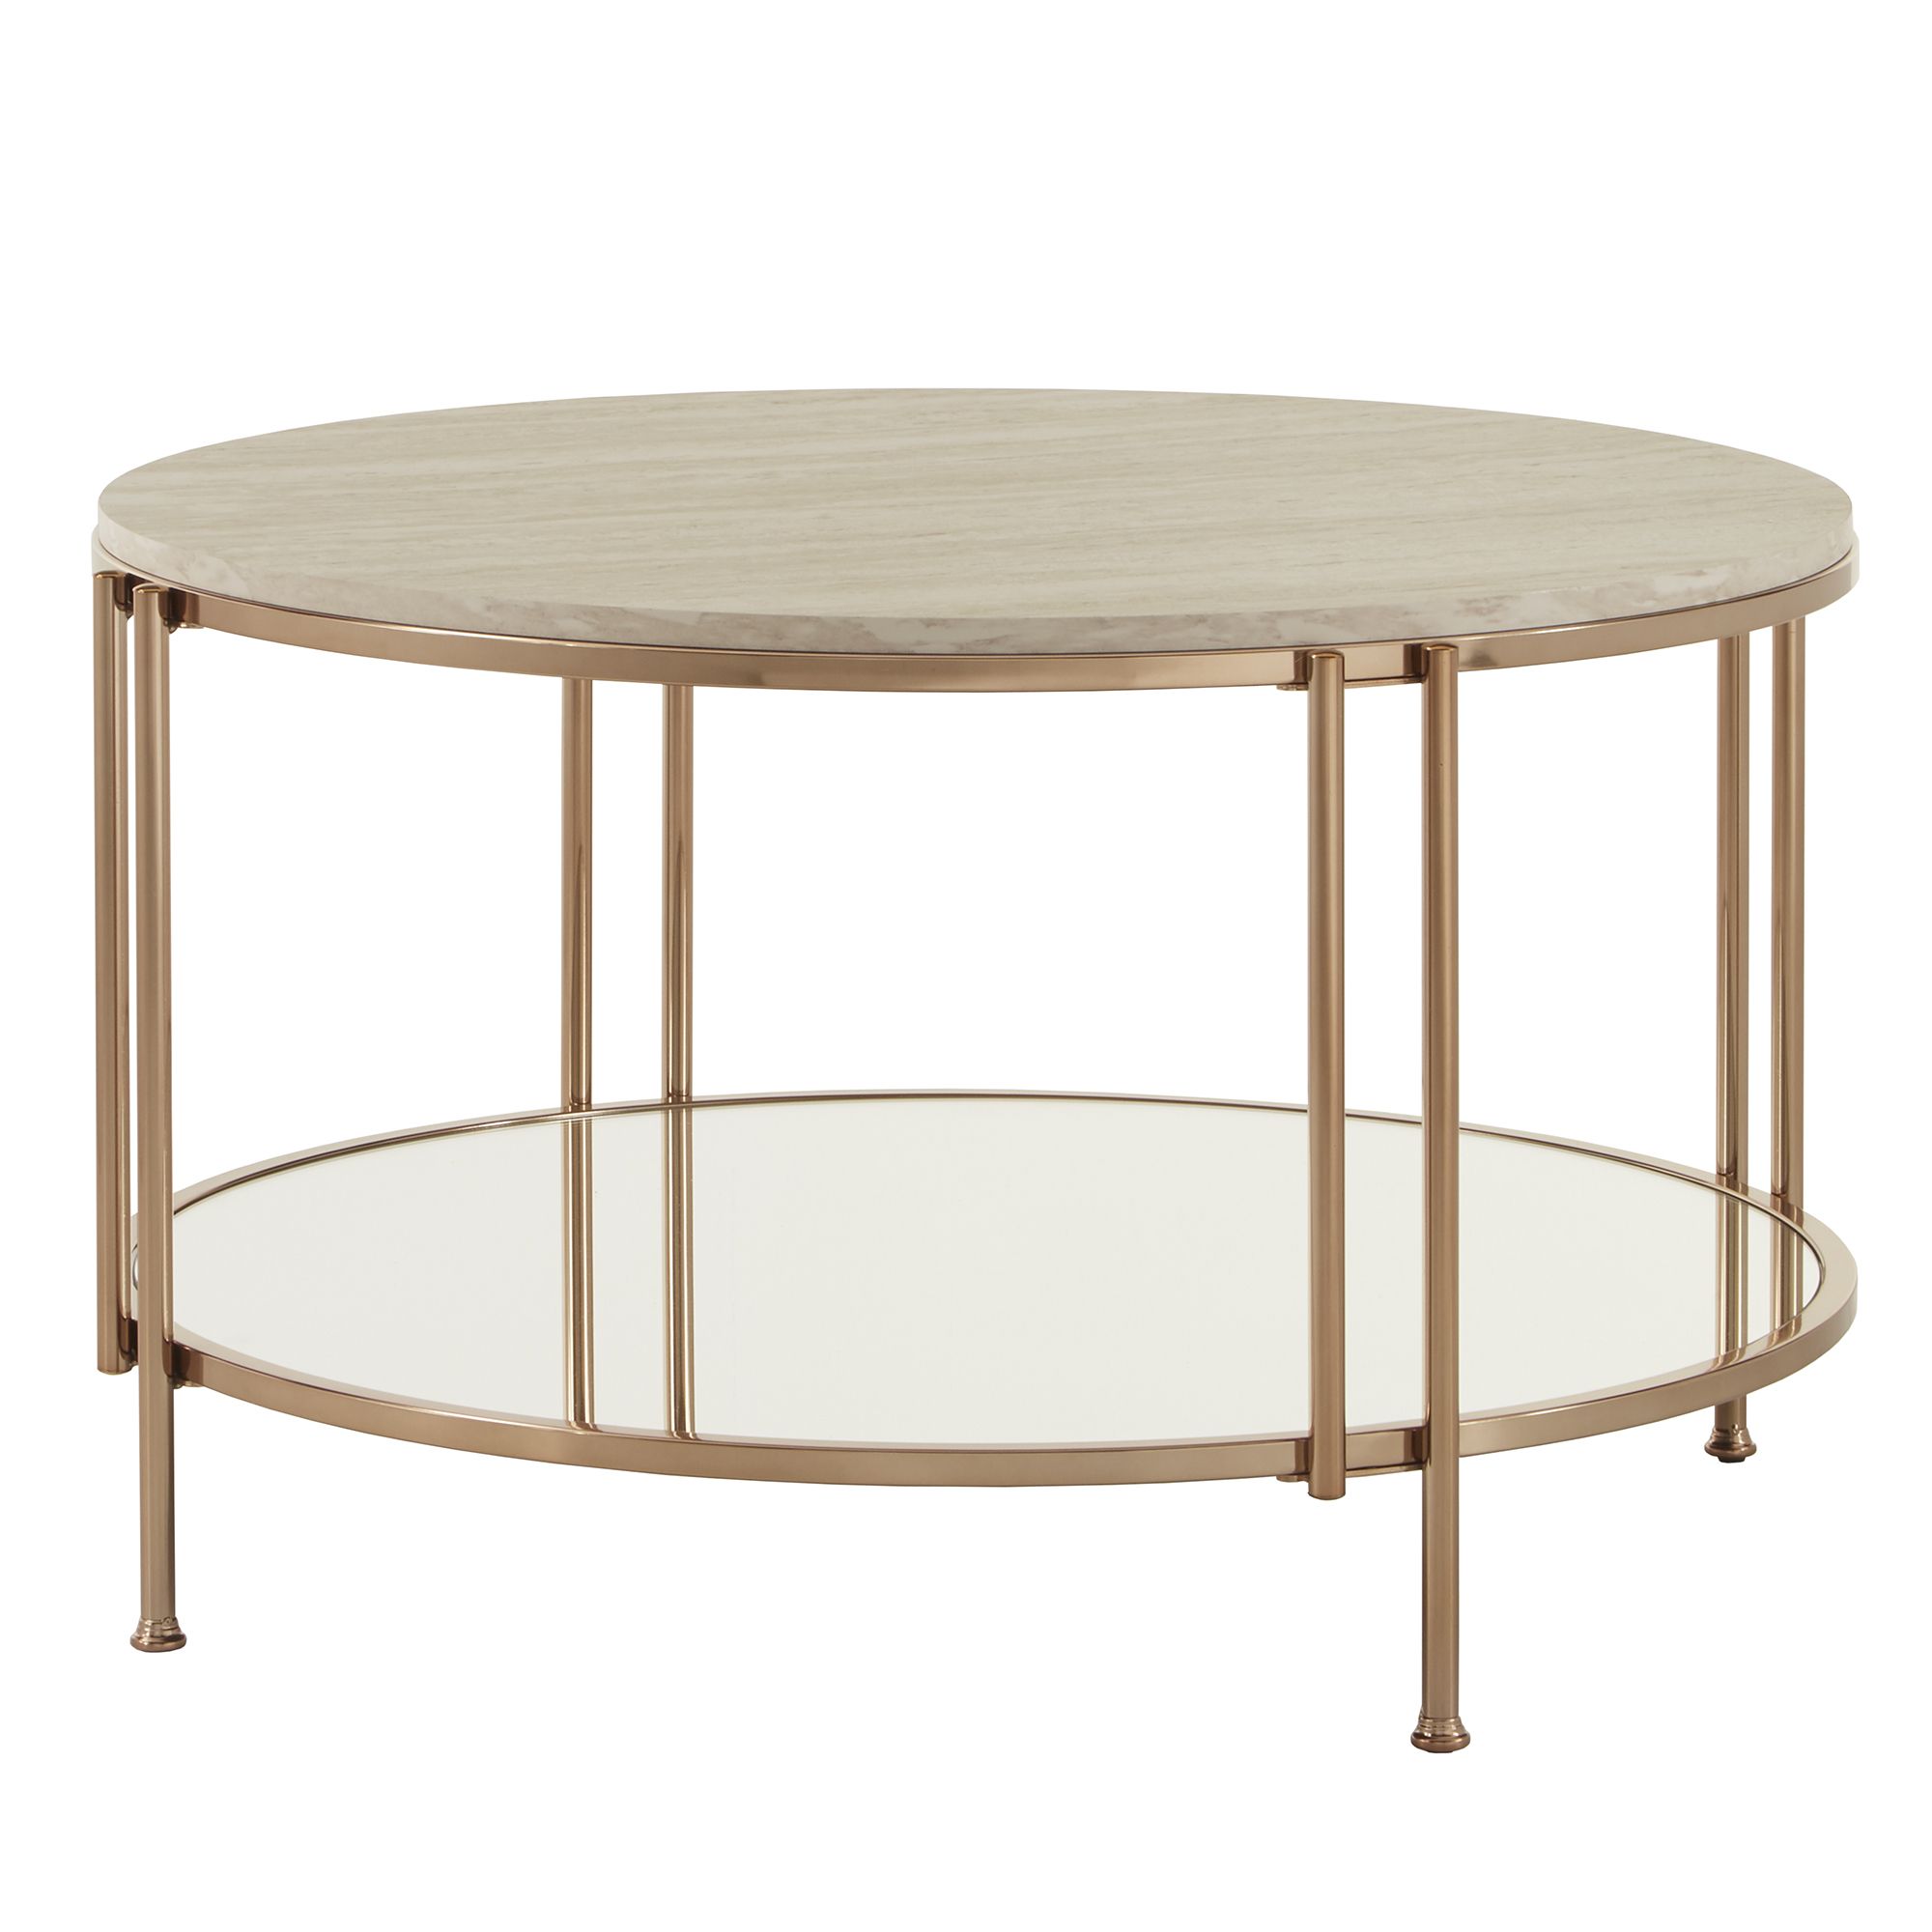 Weston Home Shaelyn Round Gold Cocktail Table With Faux In 2020 Mirrored Cocktail Tables (View 2 of 20)